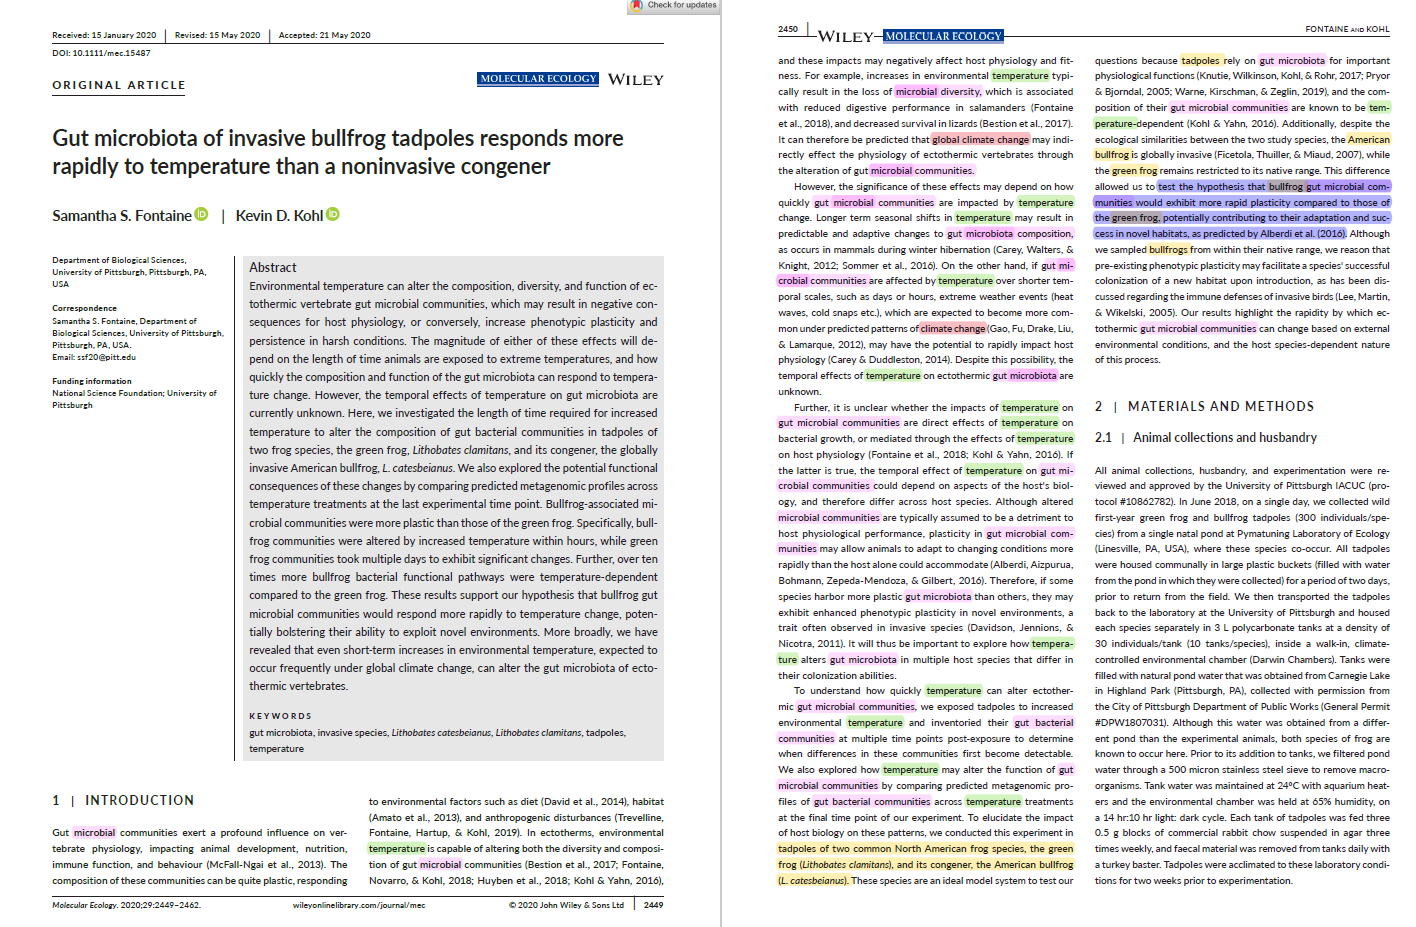 Distribution of the theme, topic, variable, study system and hypothesis in the introduction. In this paper by Fontaine and Kohl (Fontaine and Kohl 2020) I have highlighted the theme (climate change = red), topic (microbiome = pink), variable (temperature = green), study system (anurans = yellow) and hypothesis (blue).